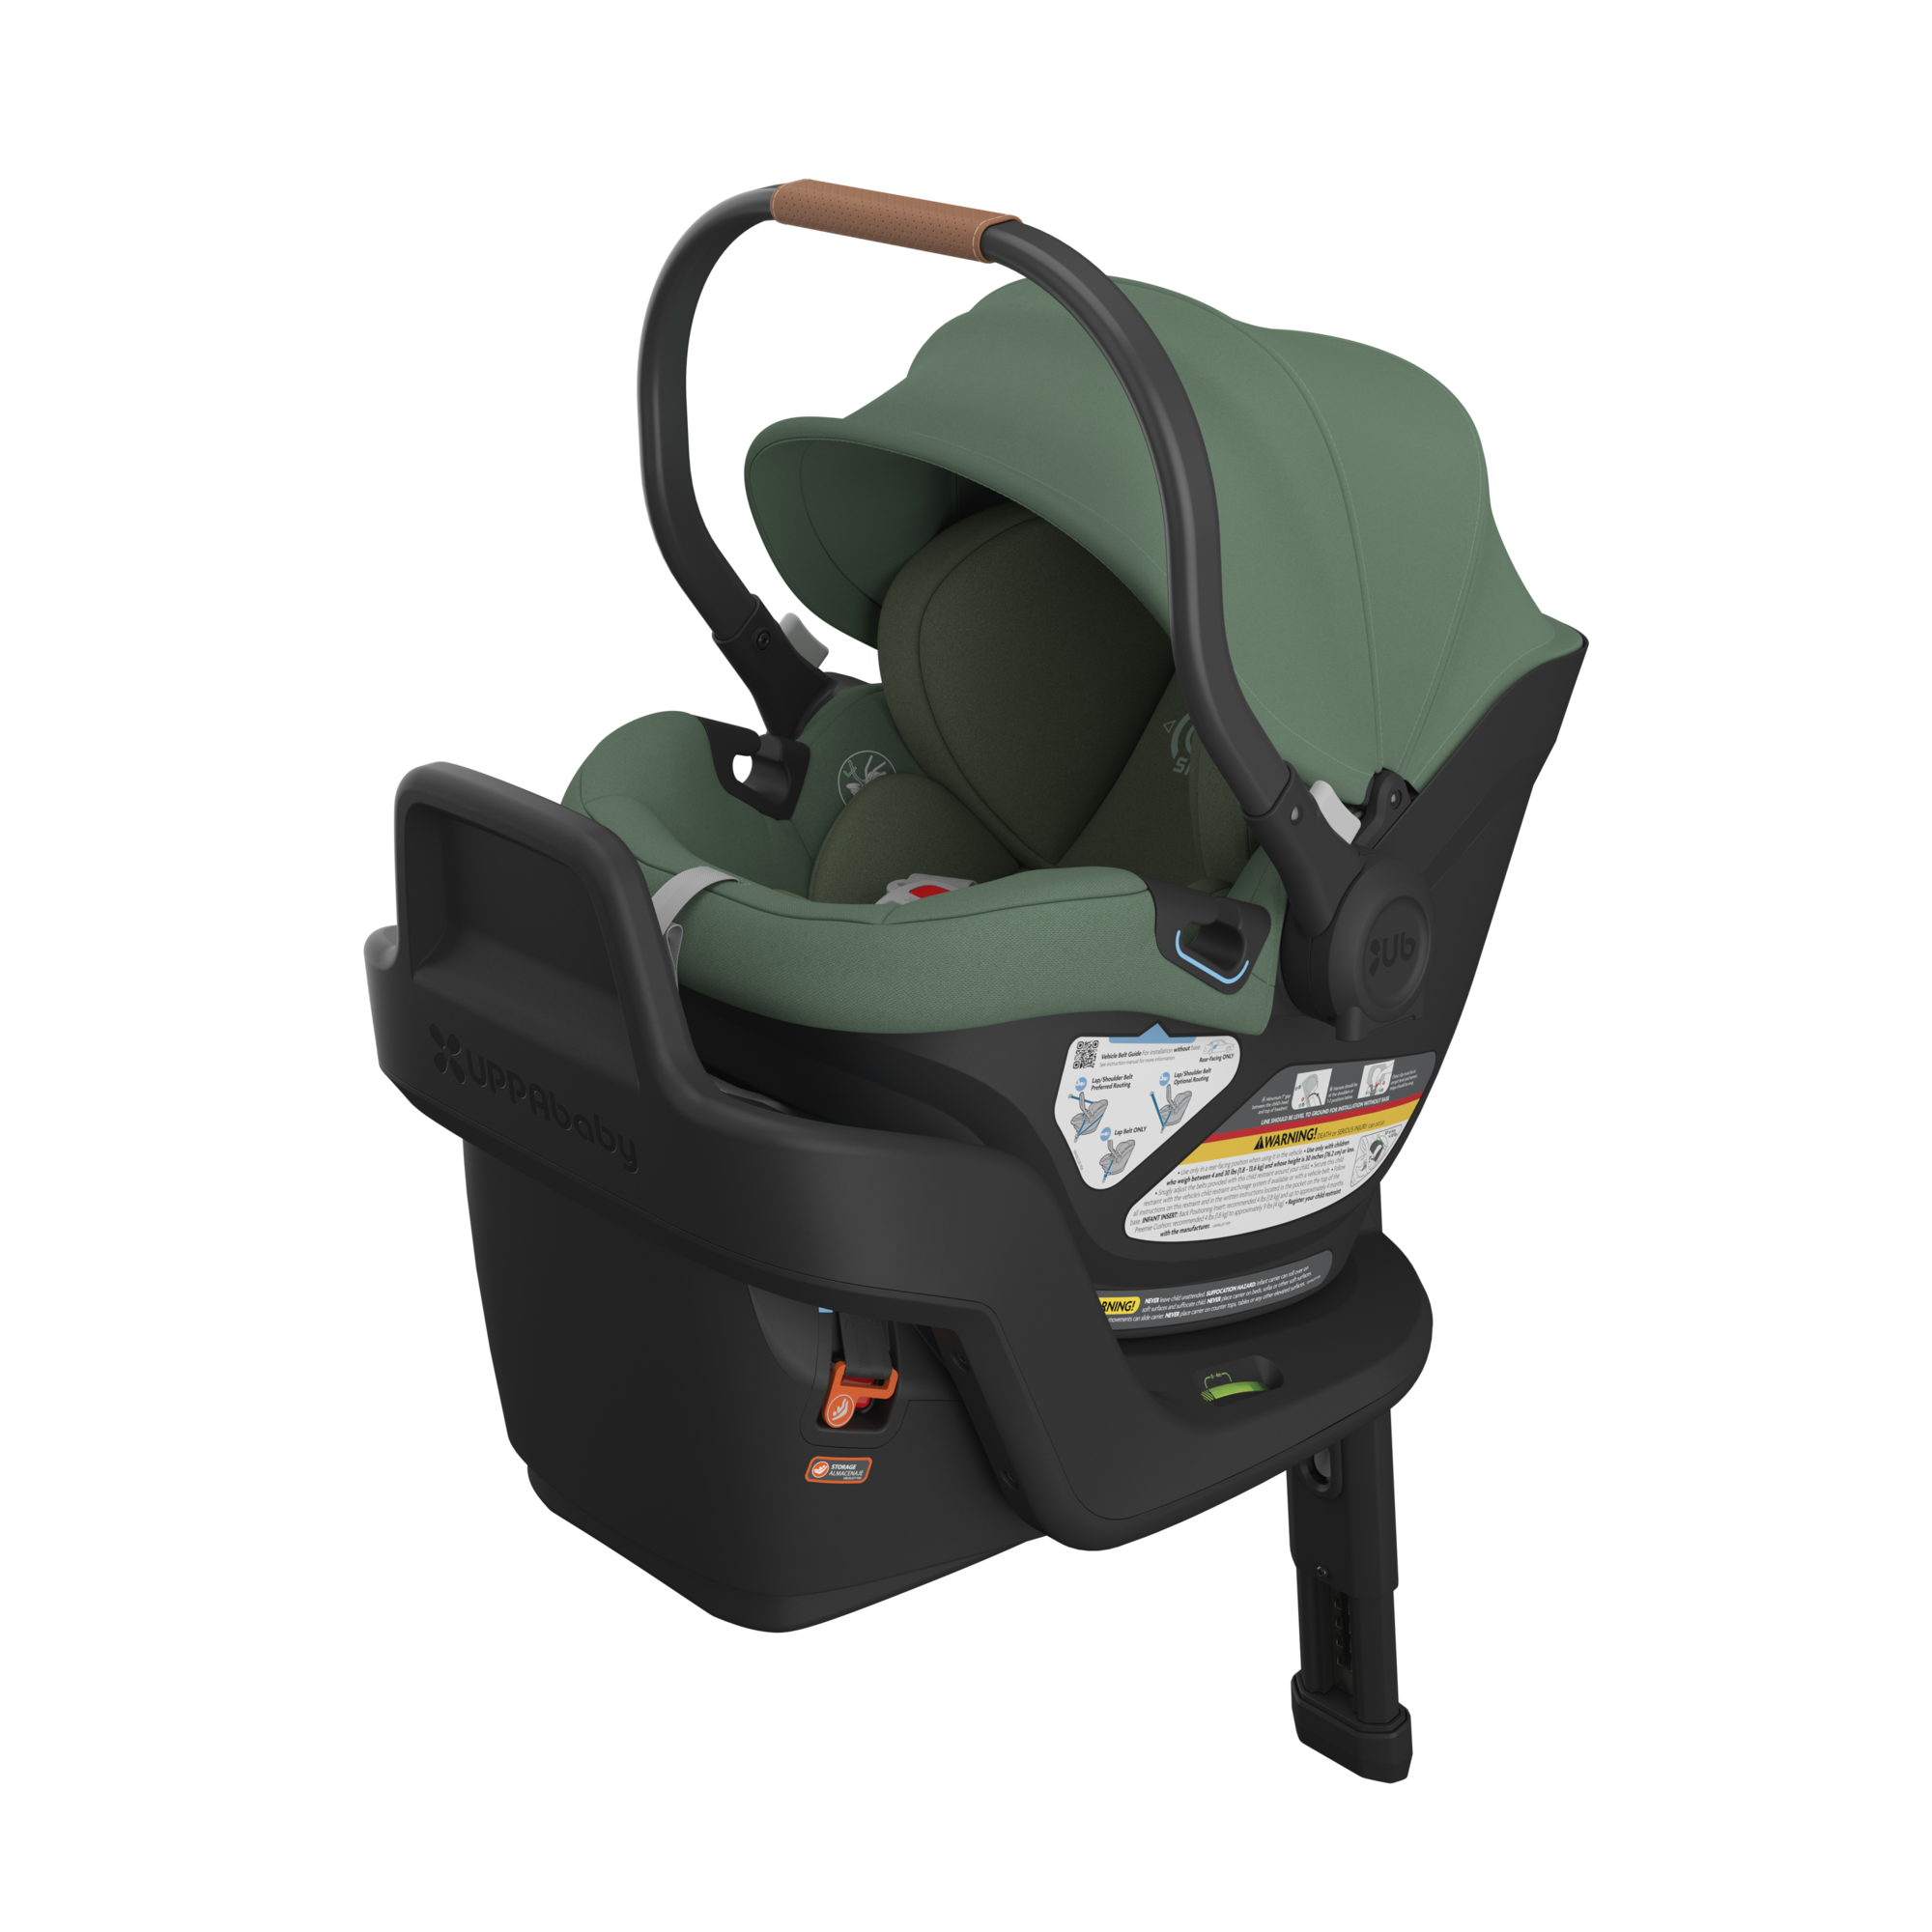 UPPAbaby Aria Infant Car Seat - Gwen (Green/Saddle Leather)